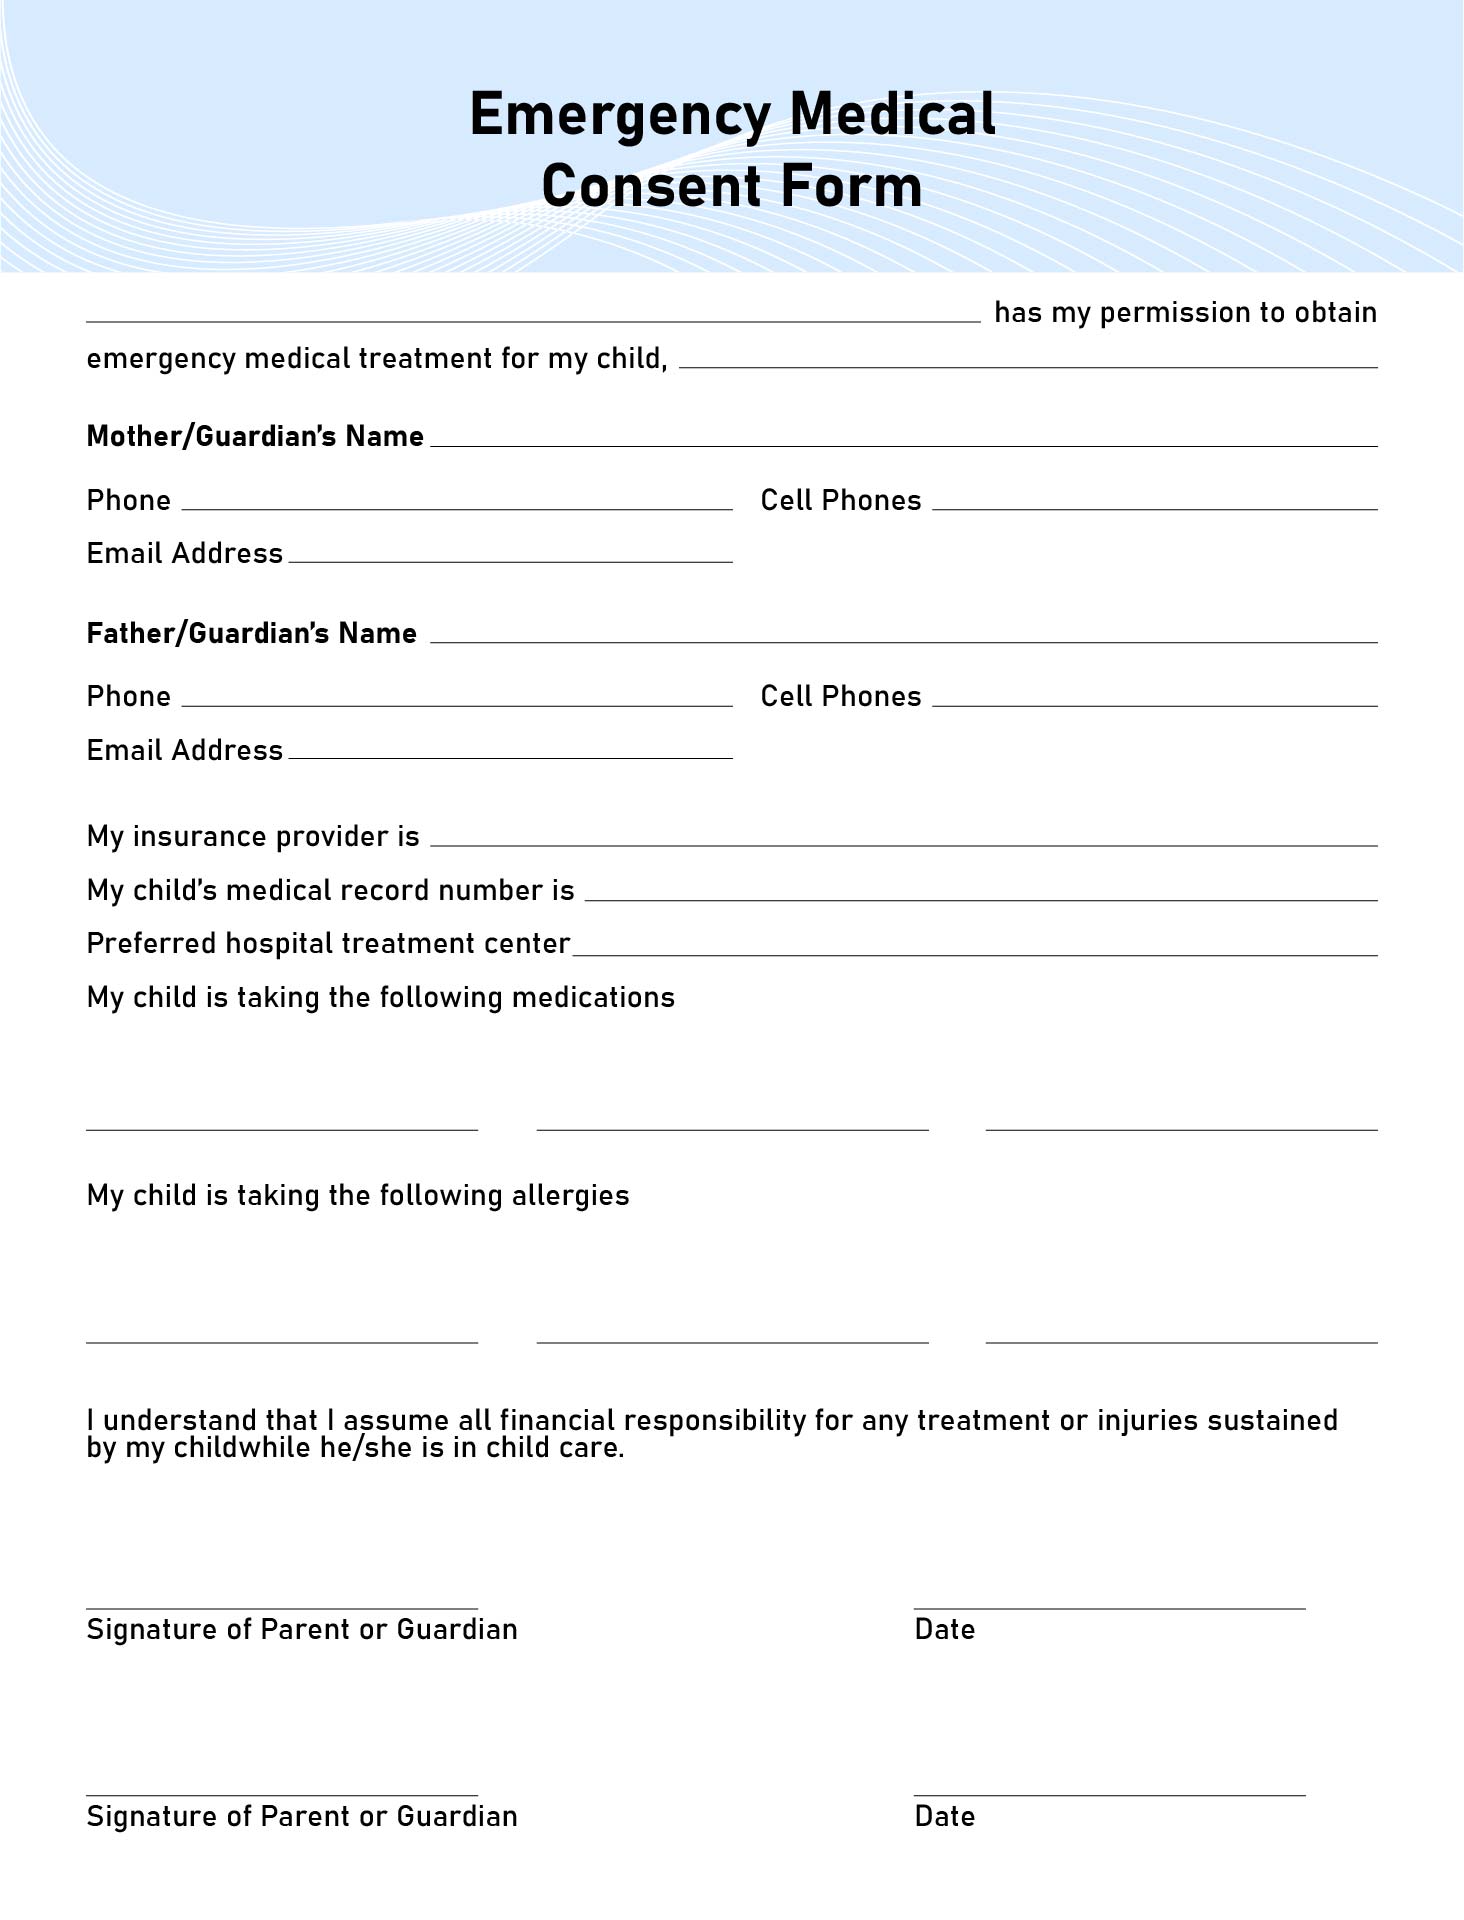 Printable Medical Emergency Consent Form Templates